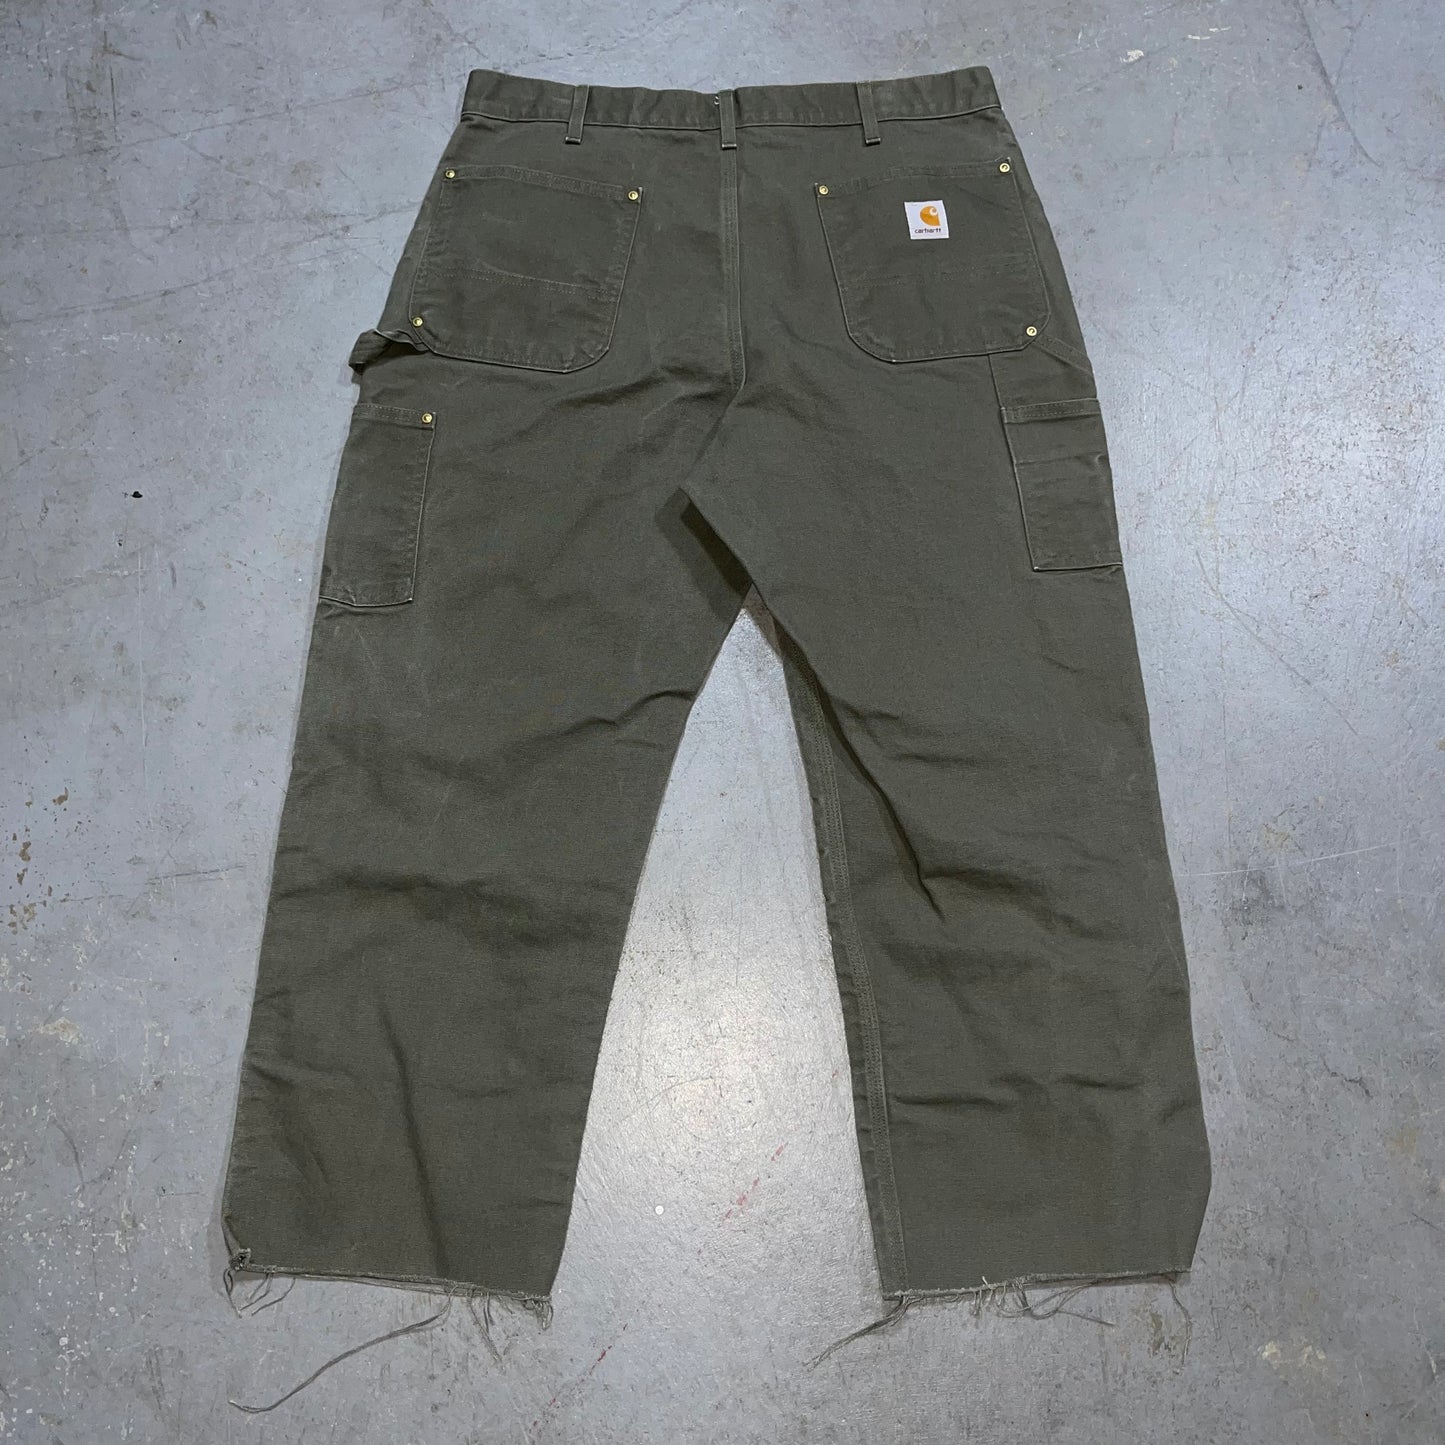 Y2K Carhartt Made In USA Double Knee Pants. Size 36x32